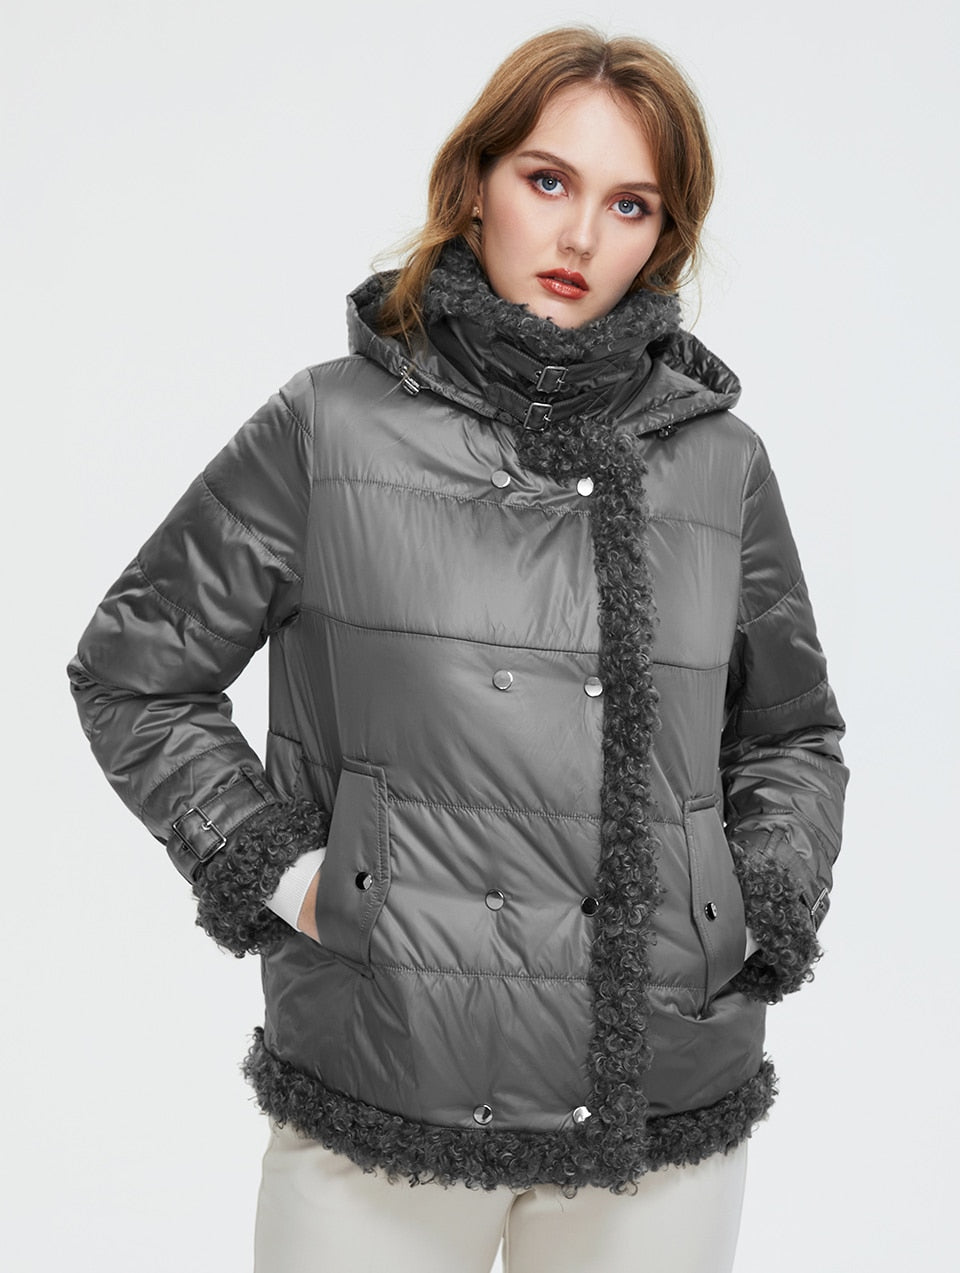 New Winter Collection Double Breasted Warmy Cool Coats For Women